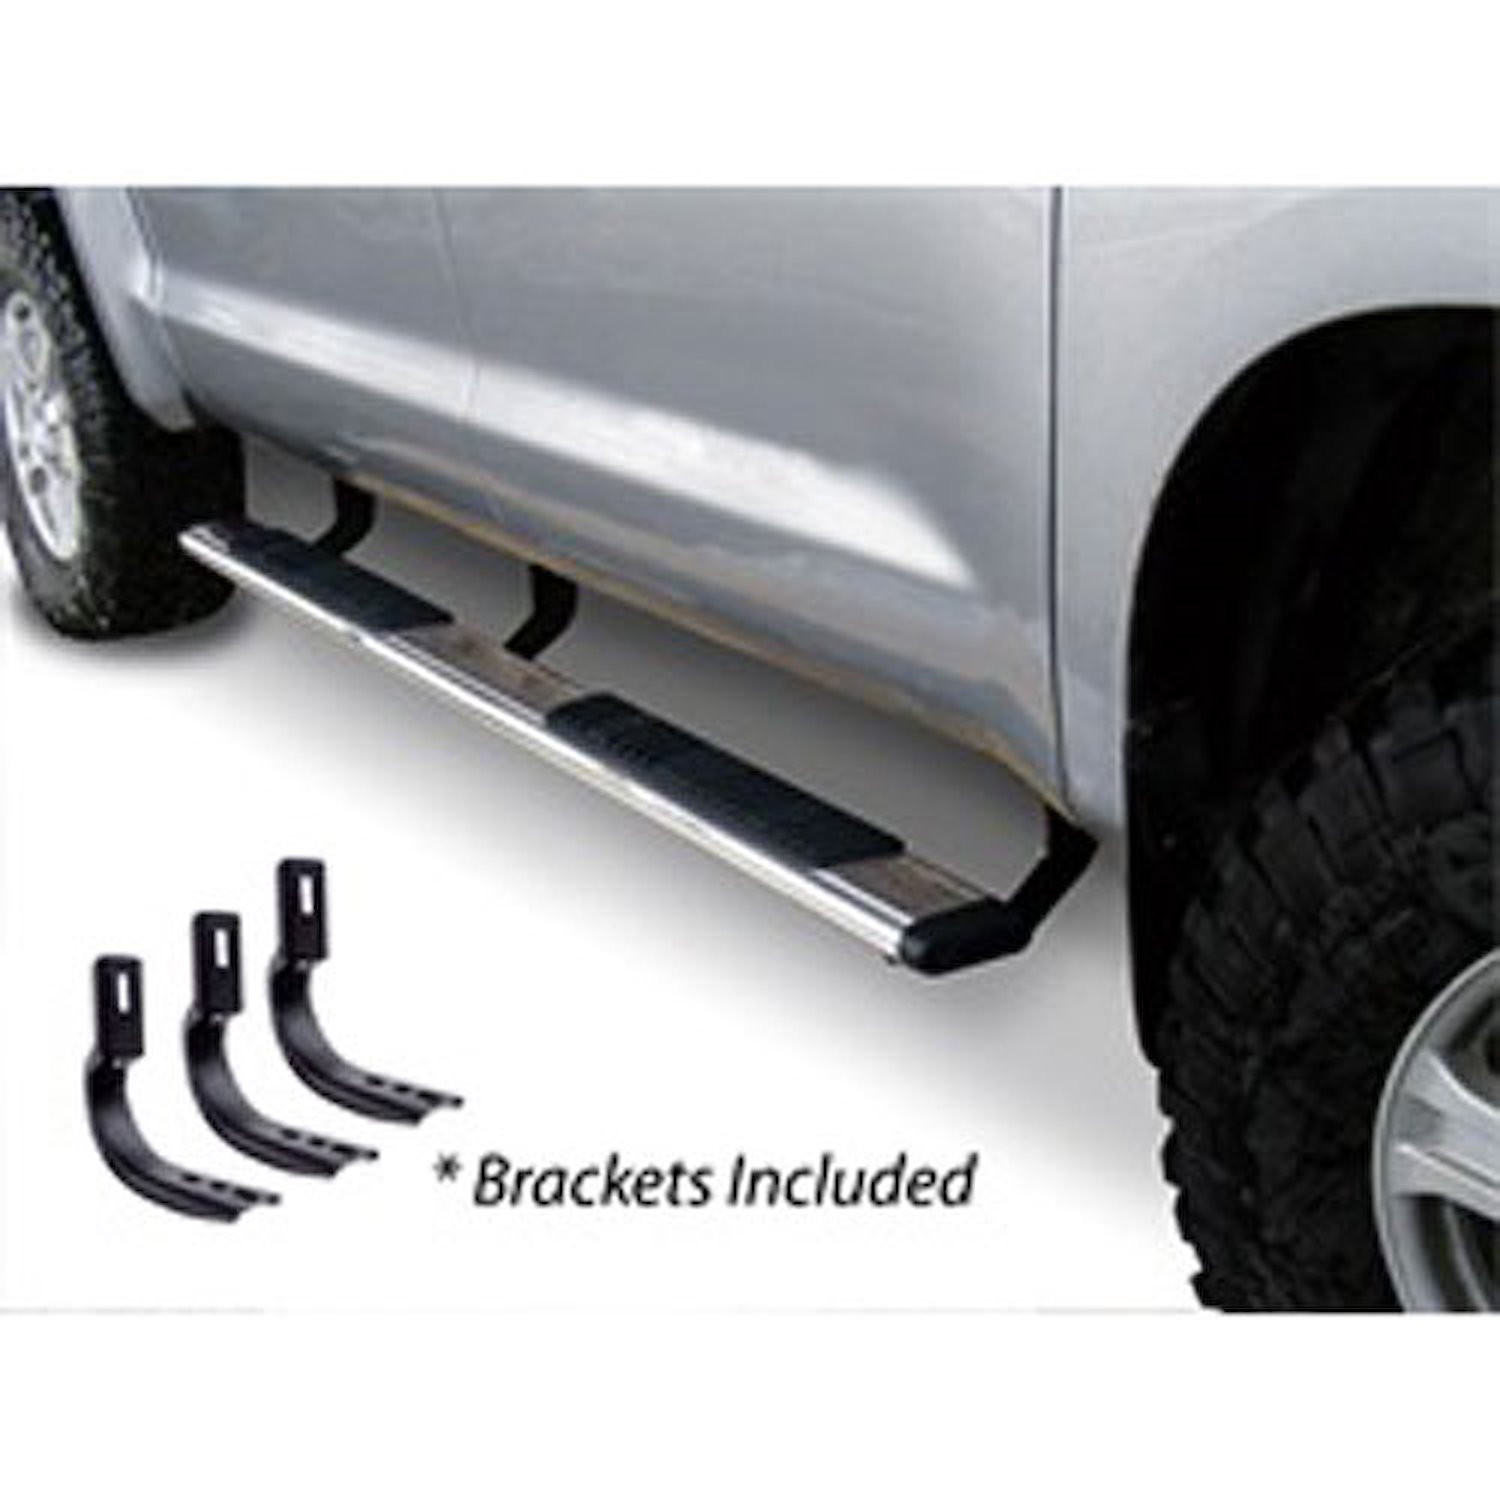 5" OE Xtreme Low Profile SideSteps Kit 1999-16 Ford F-250/F-350 Super Duty